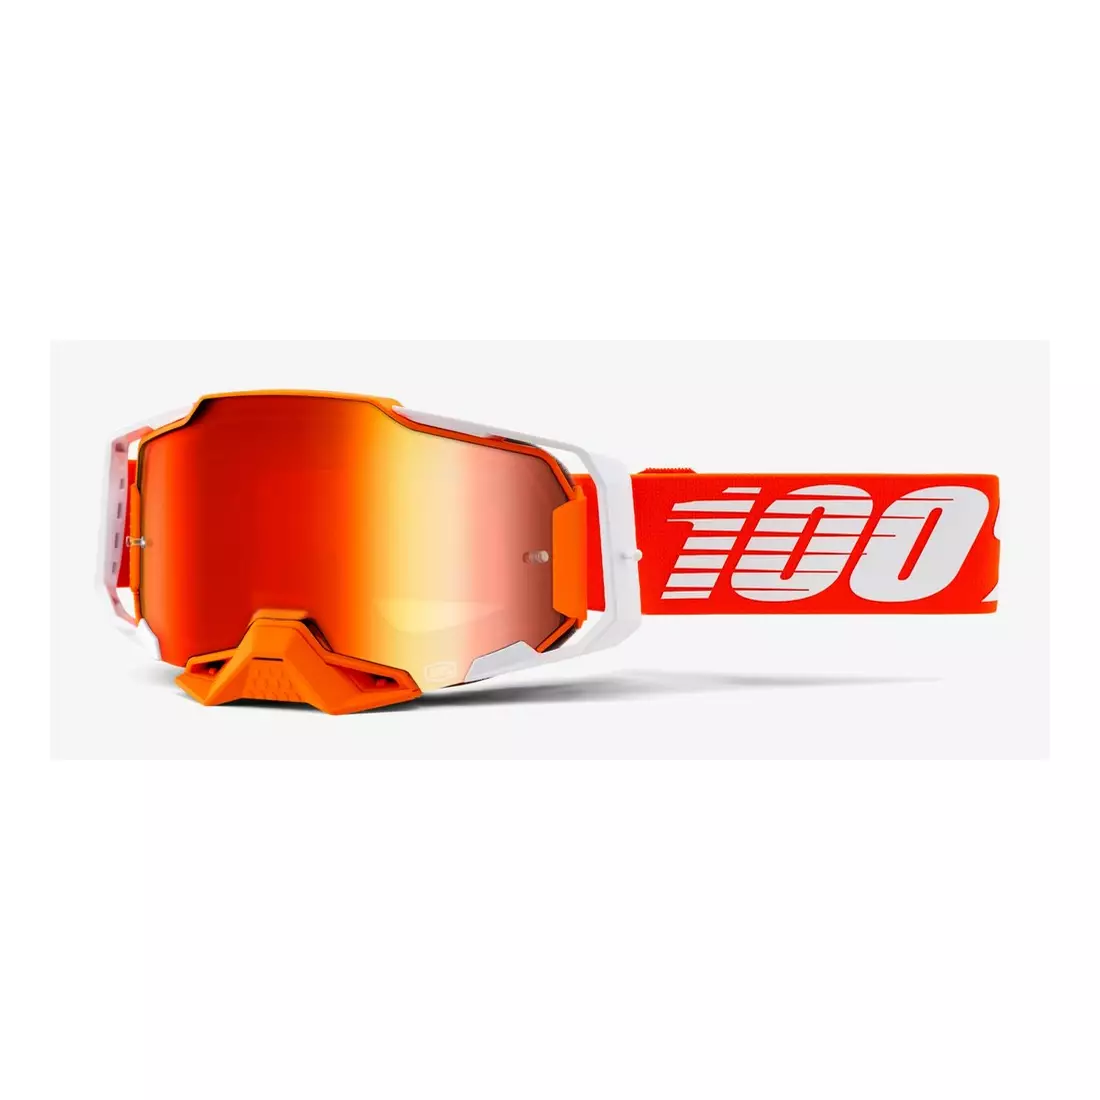 100% bicycle goggles ARMEGA (red mirror, LT 38%+/-5%) regal STO-50721-251-07